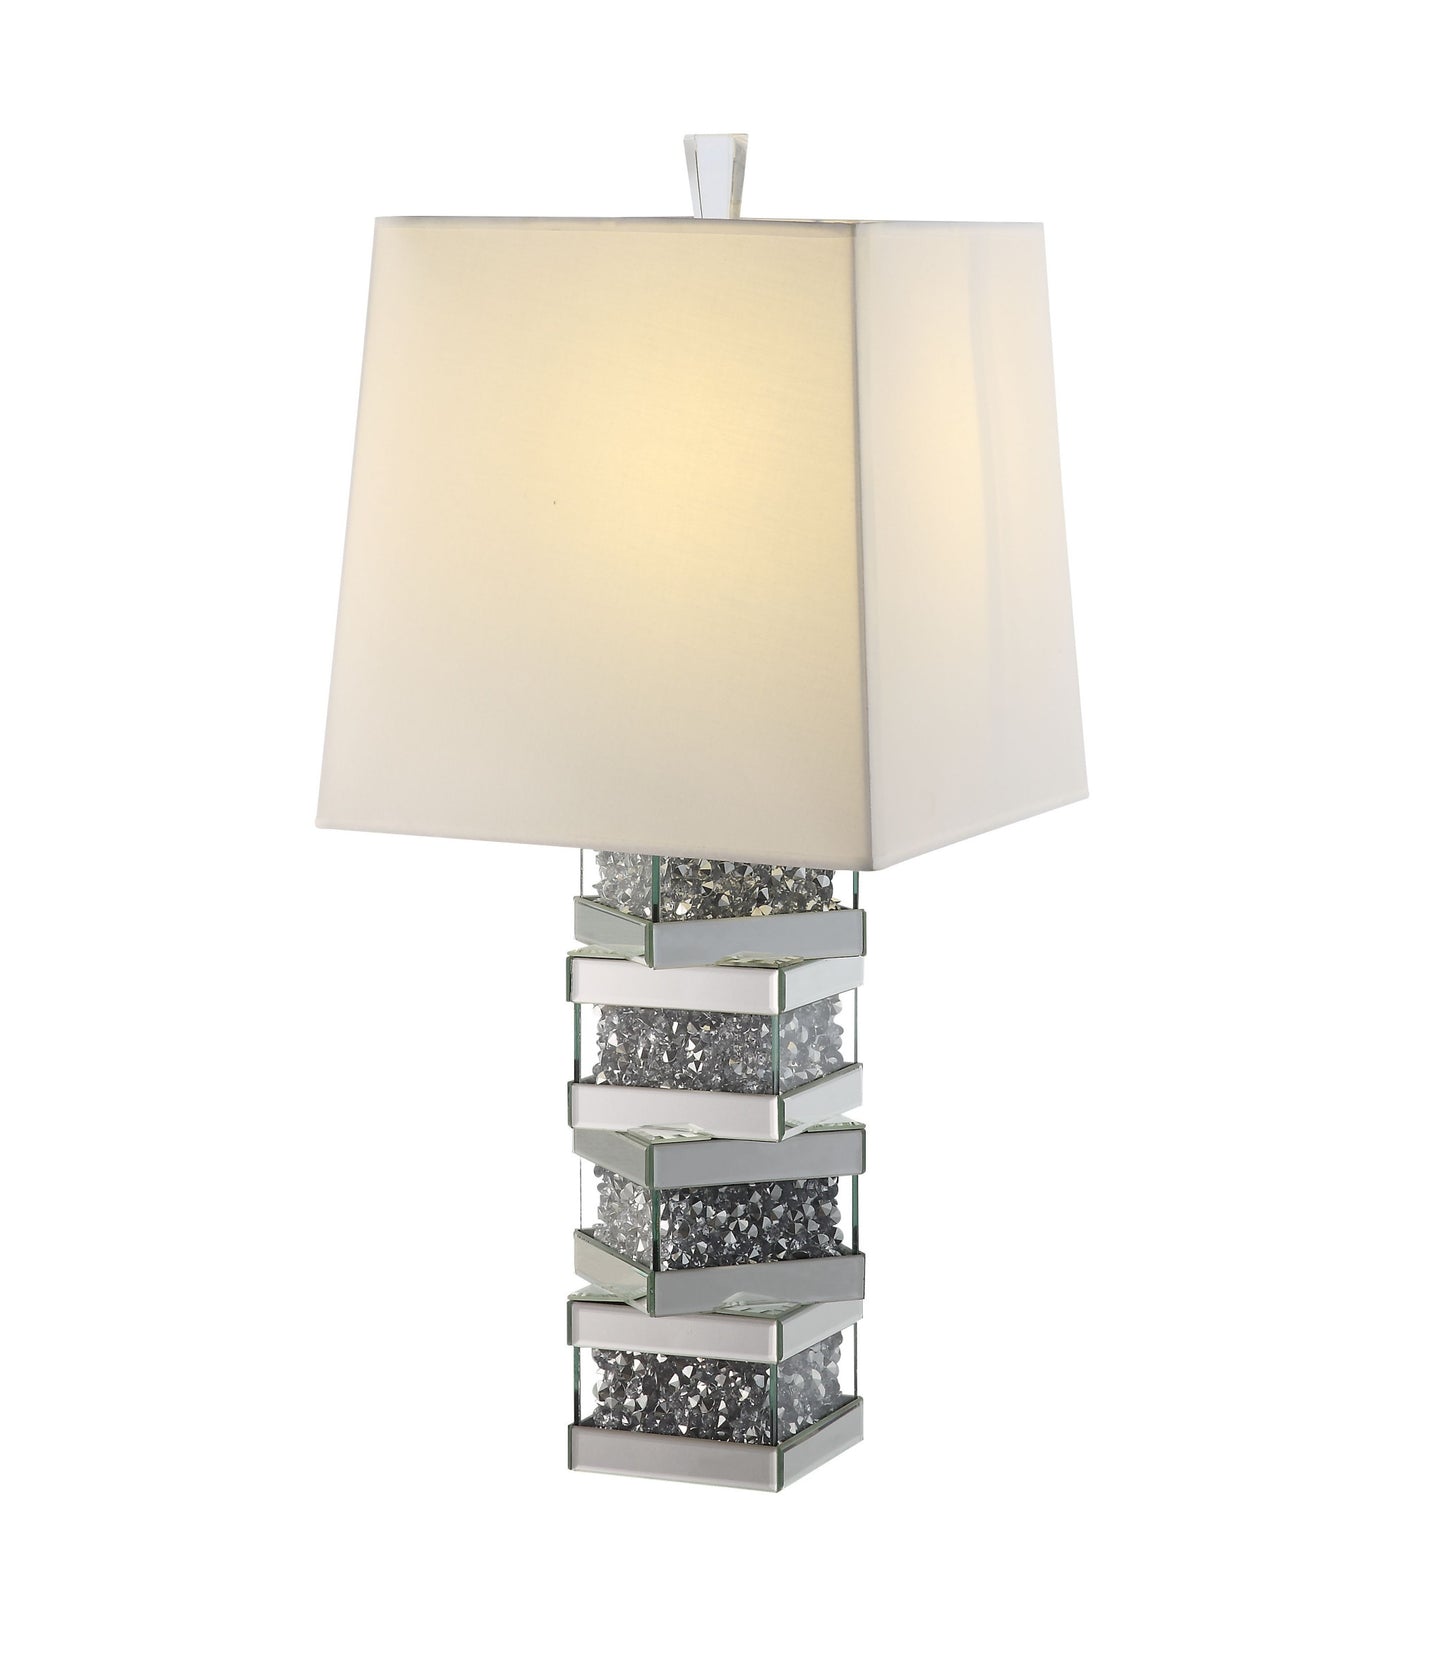 30" Clear and Mirrored Glass Faux Crystal Table Lamp With White Square Shade